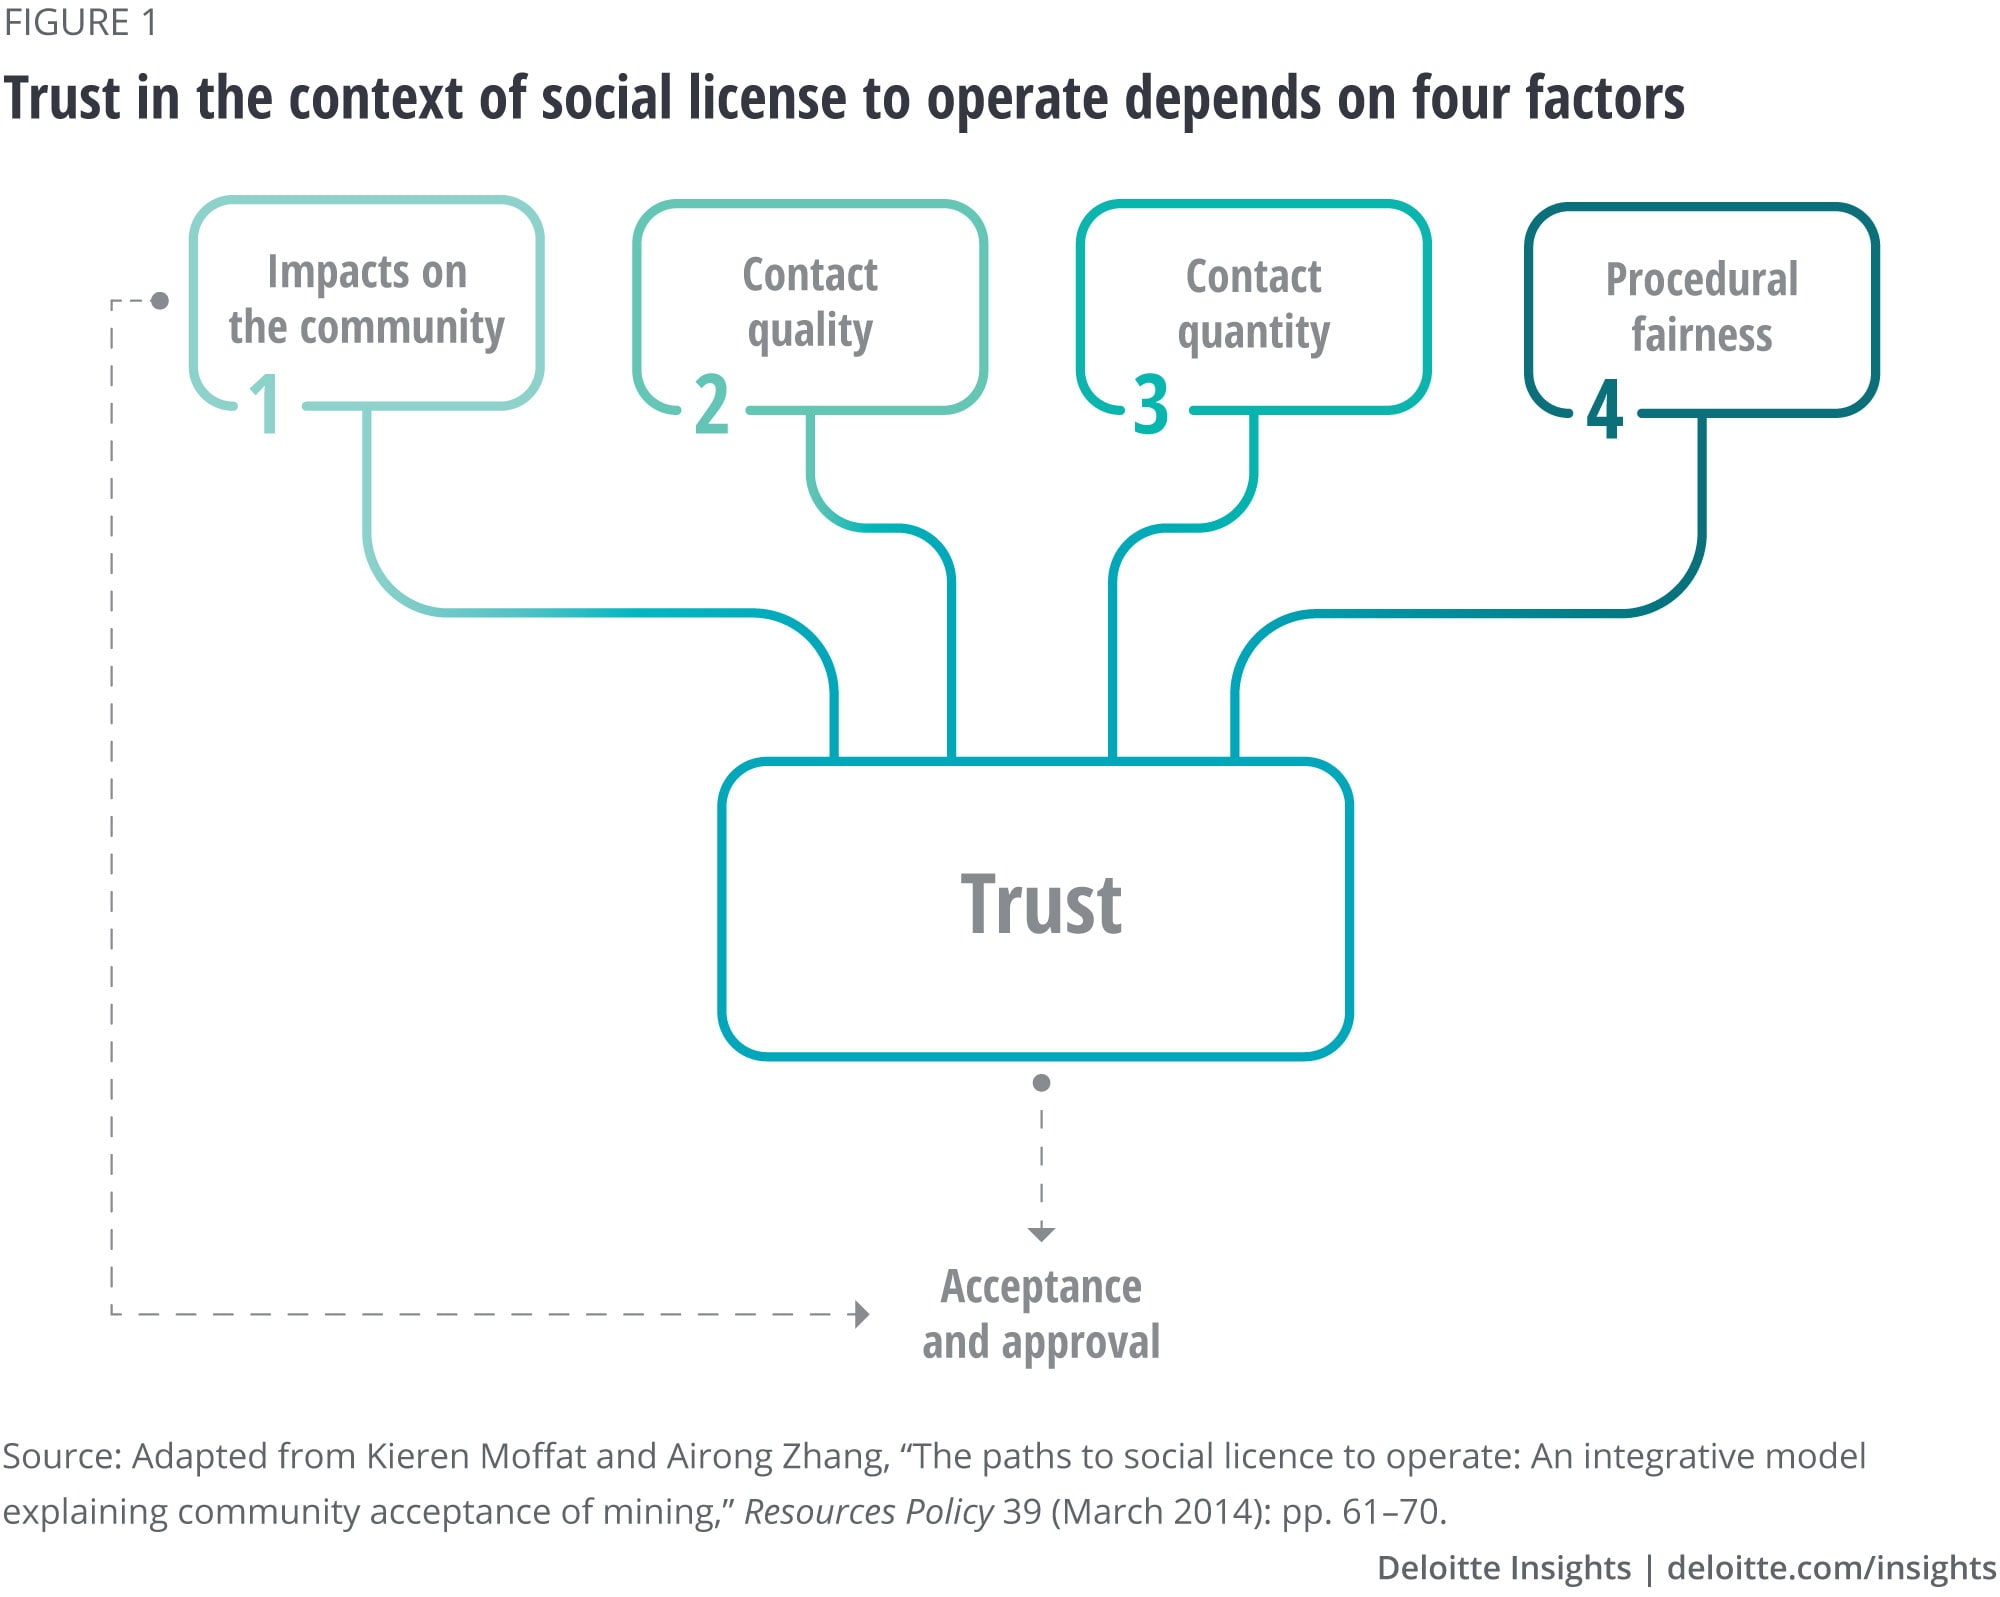 Trust in the context of social license to operate relies on four factors